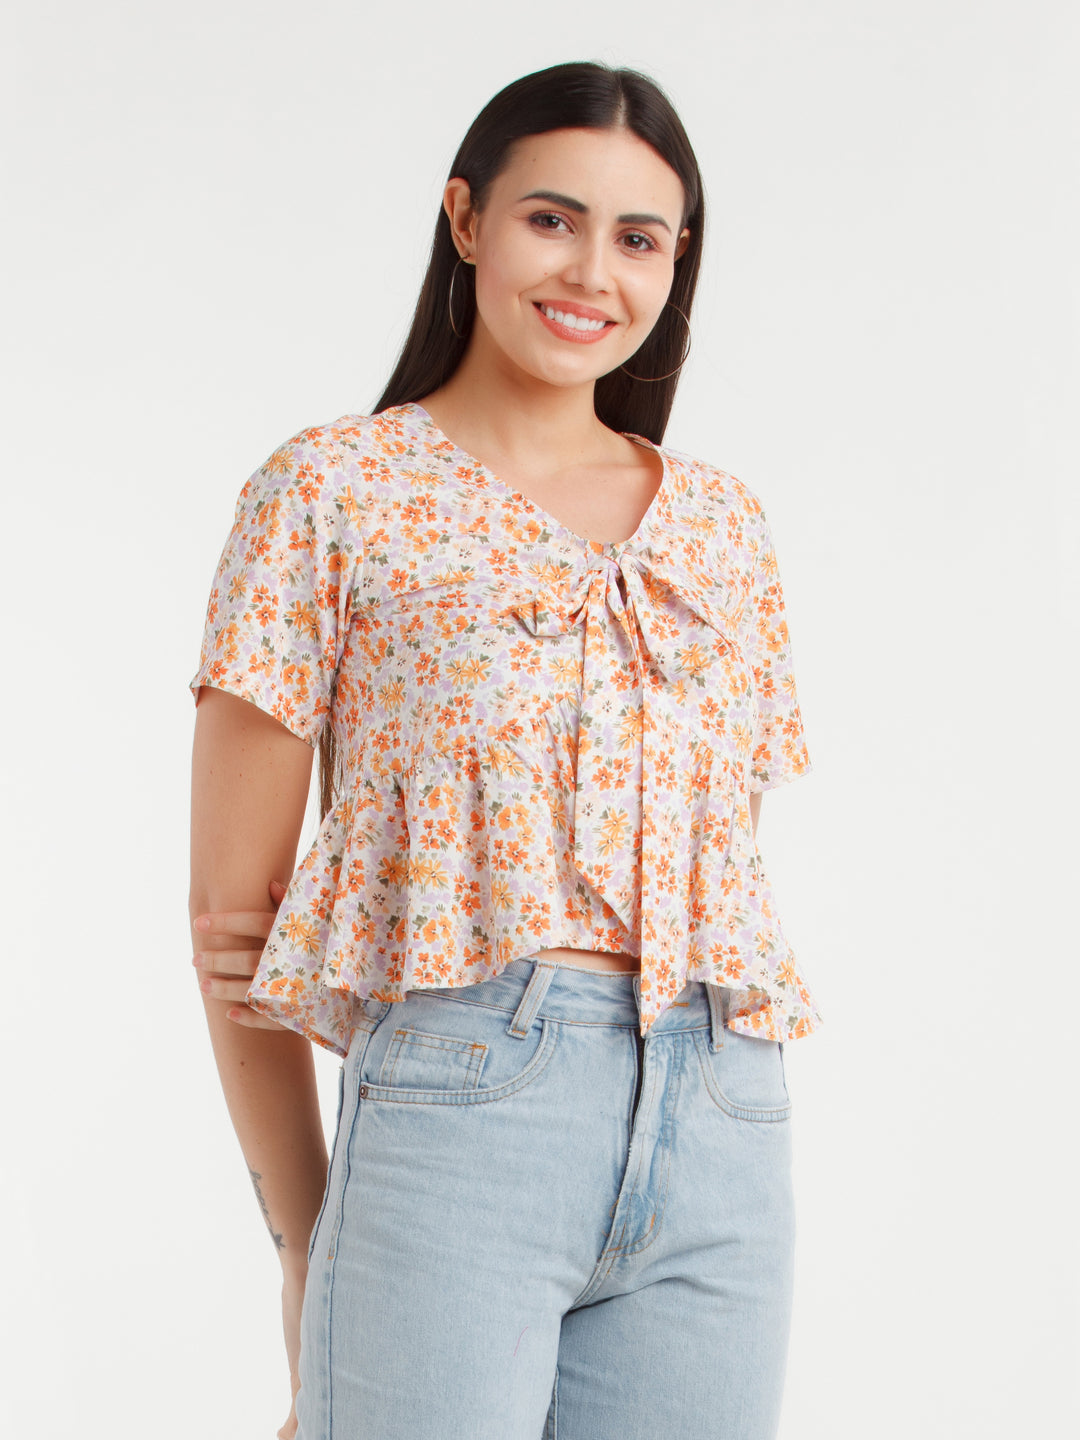 Multicolor Printed Tie-Up Top For Women